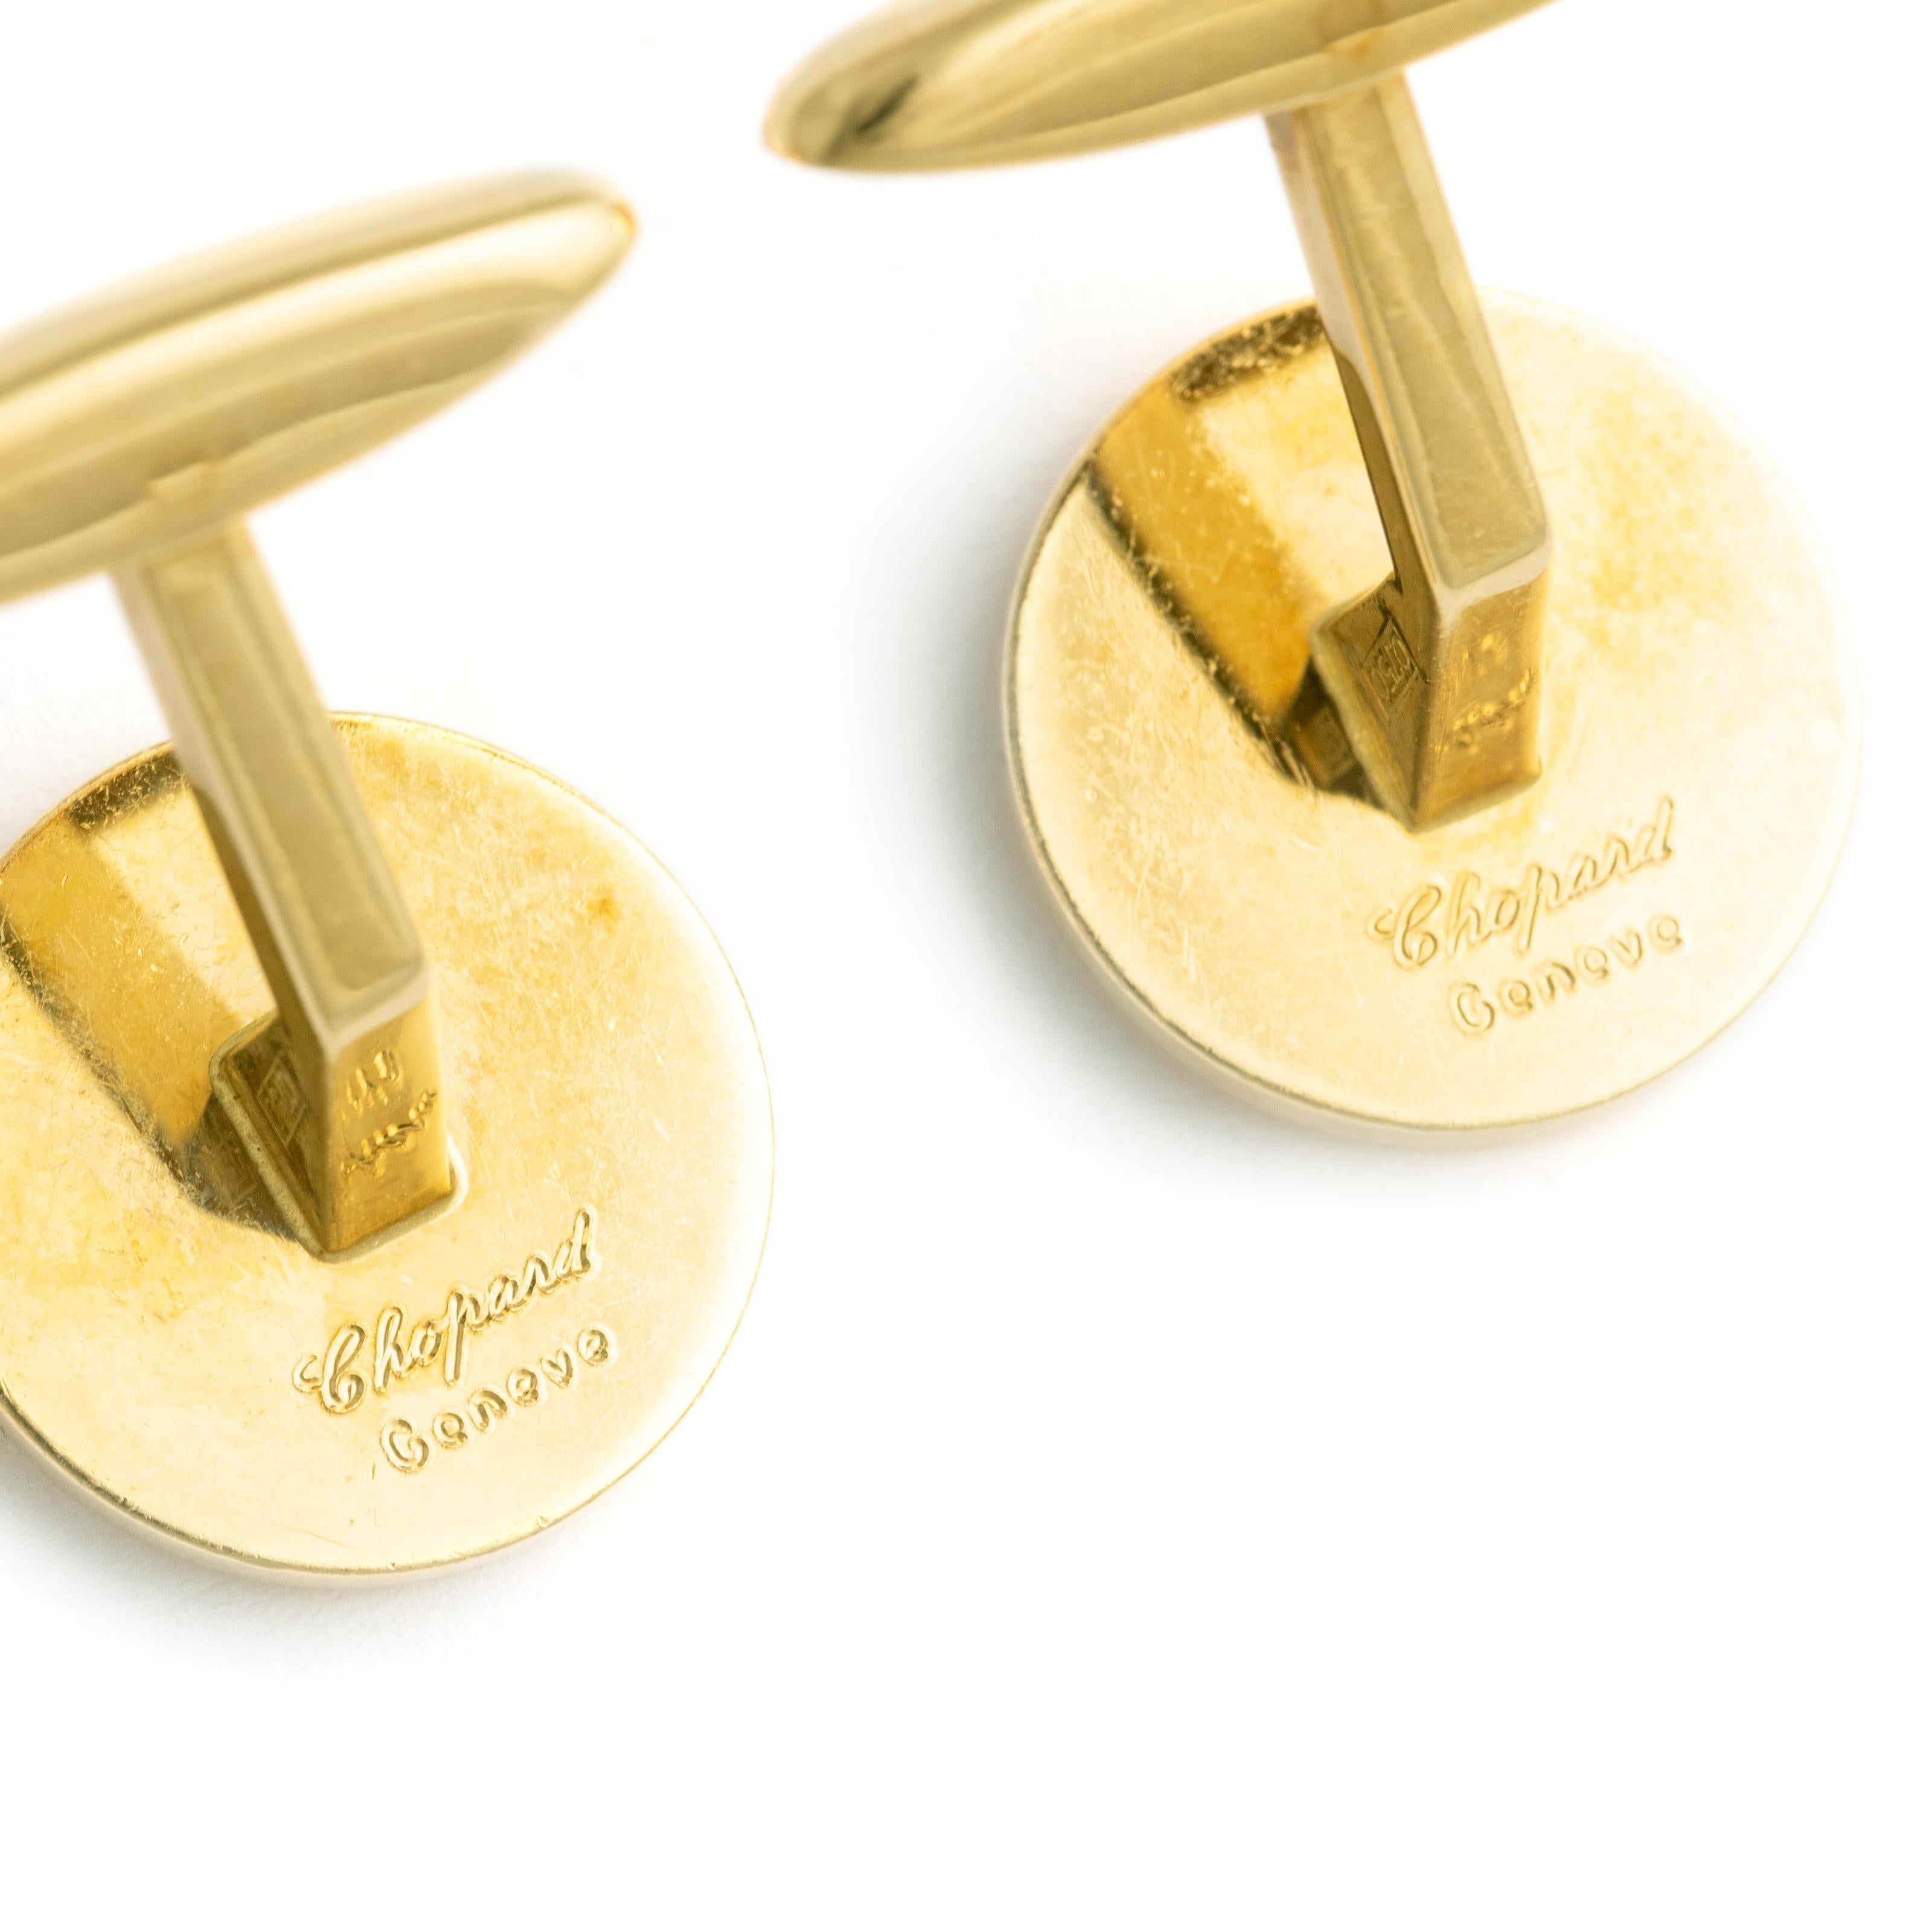 Vintage Yellow Gold 18K Cufflinks.
Signed LUC.

Diameter: 1.40 centimeters.
Total length: 2.50 centimeters.
Total weight: 17.59 grams.